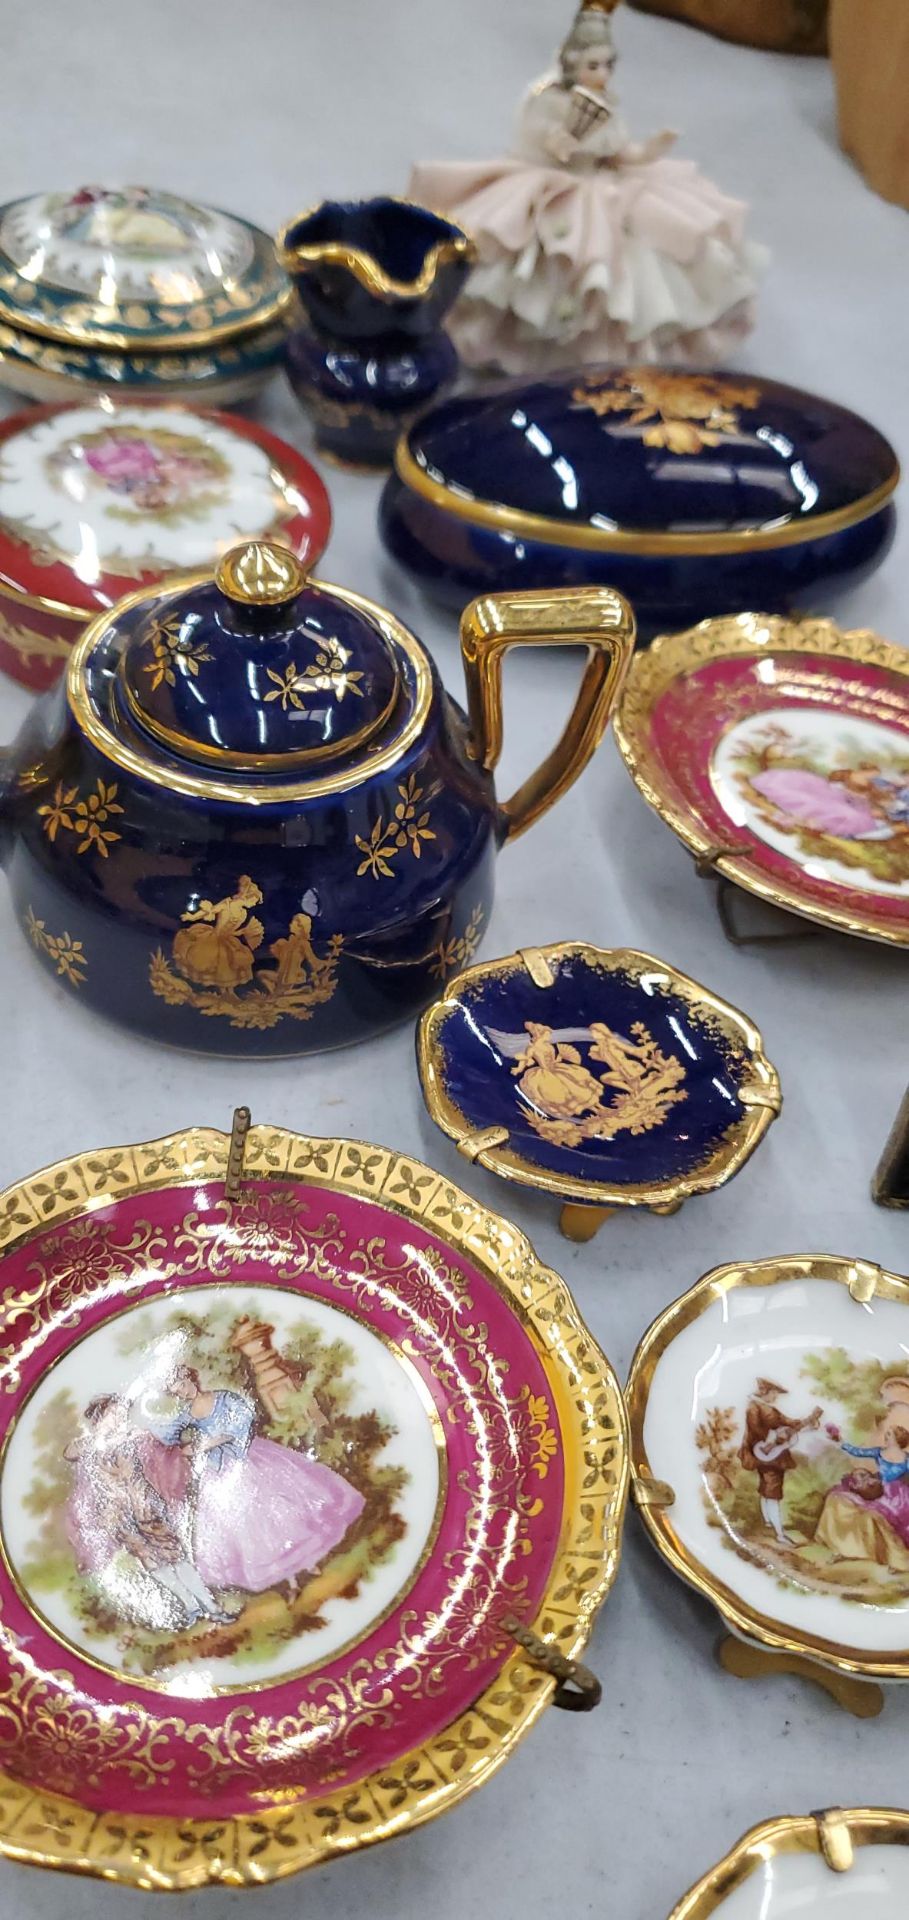 A COLLECTION OF MINIATURE LIMOGES TO INCLUDE TRINKET BOXES, PLATES, A TEAPOT, ETC PLUS A DRESDEN - Image 2 of 3